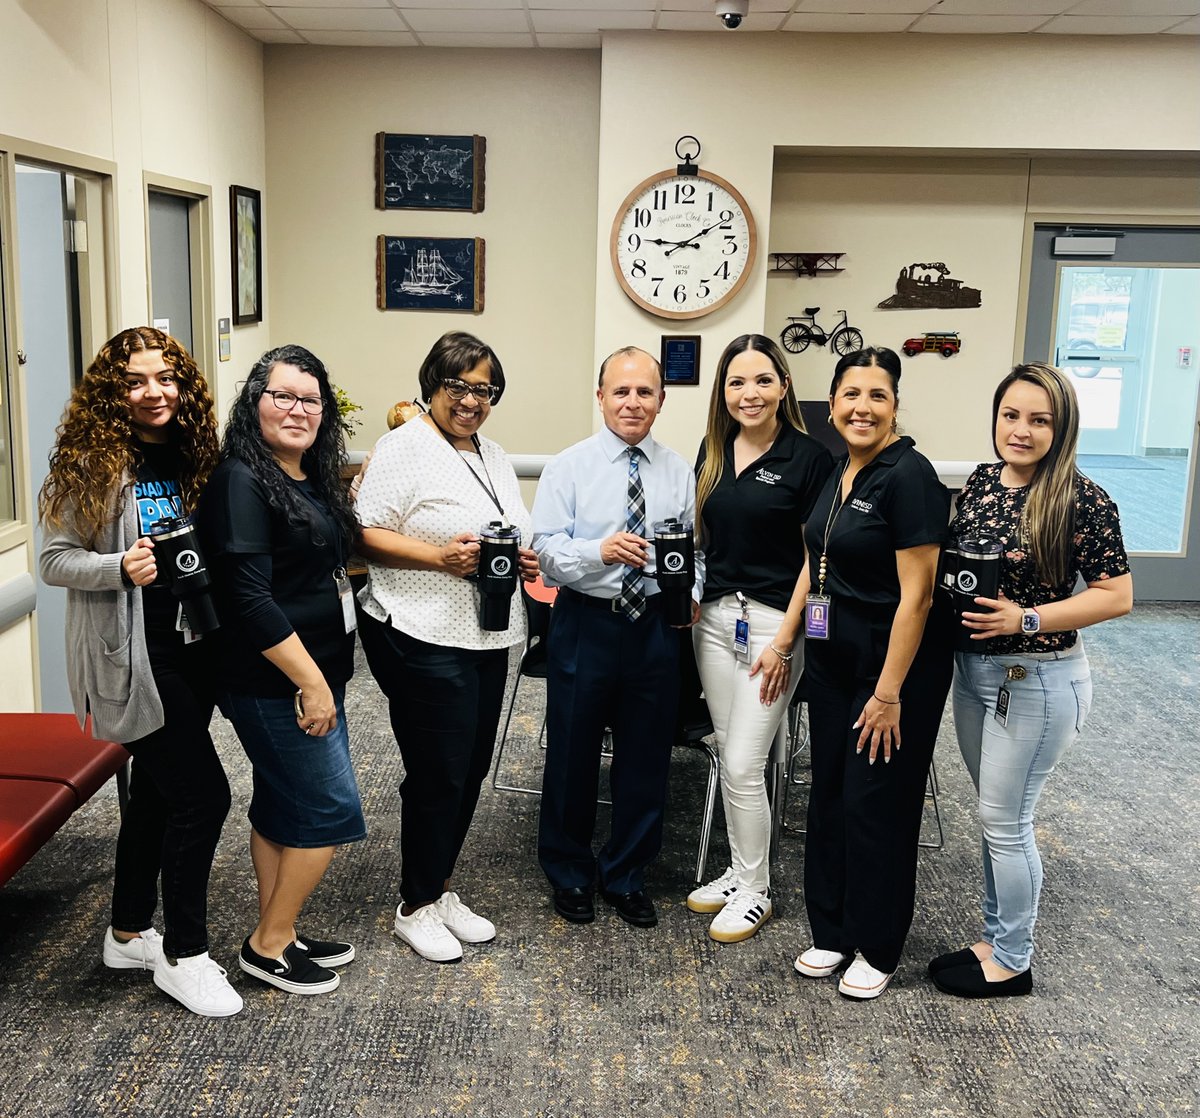 We had a great start of Teacher & Staff Appreciation Week! 🥳This morning we delivered gifts at @BelNafegar staff on behalf of the Board of Trustees and @AlvinISD ! 🎉 #TeacherAppreciationWeek